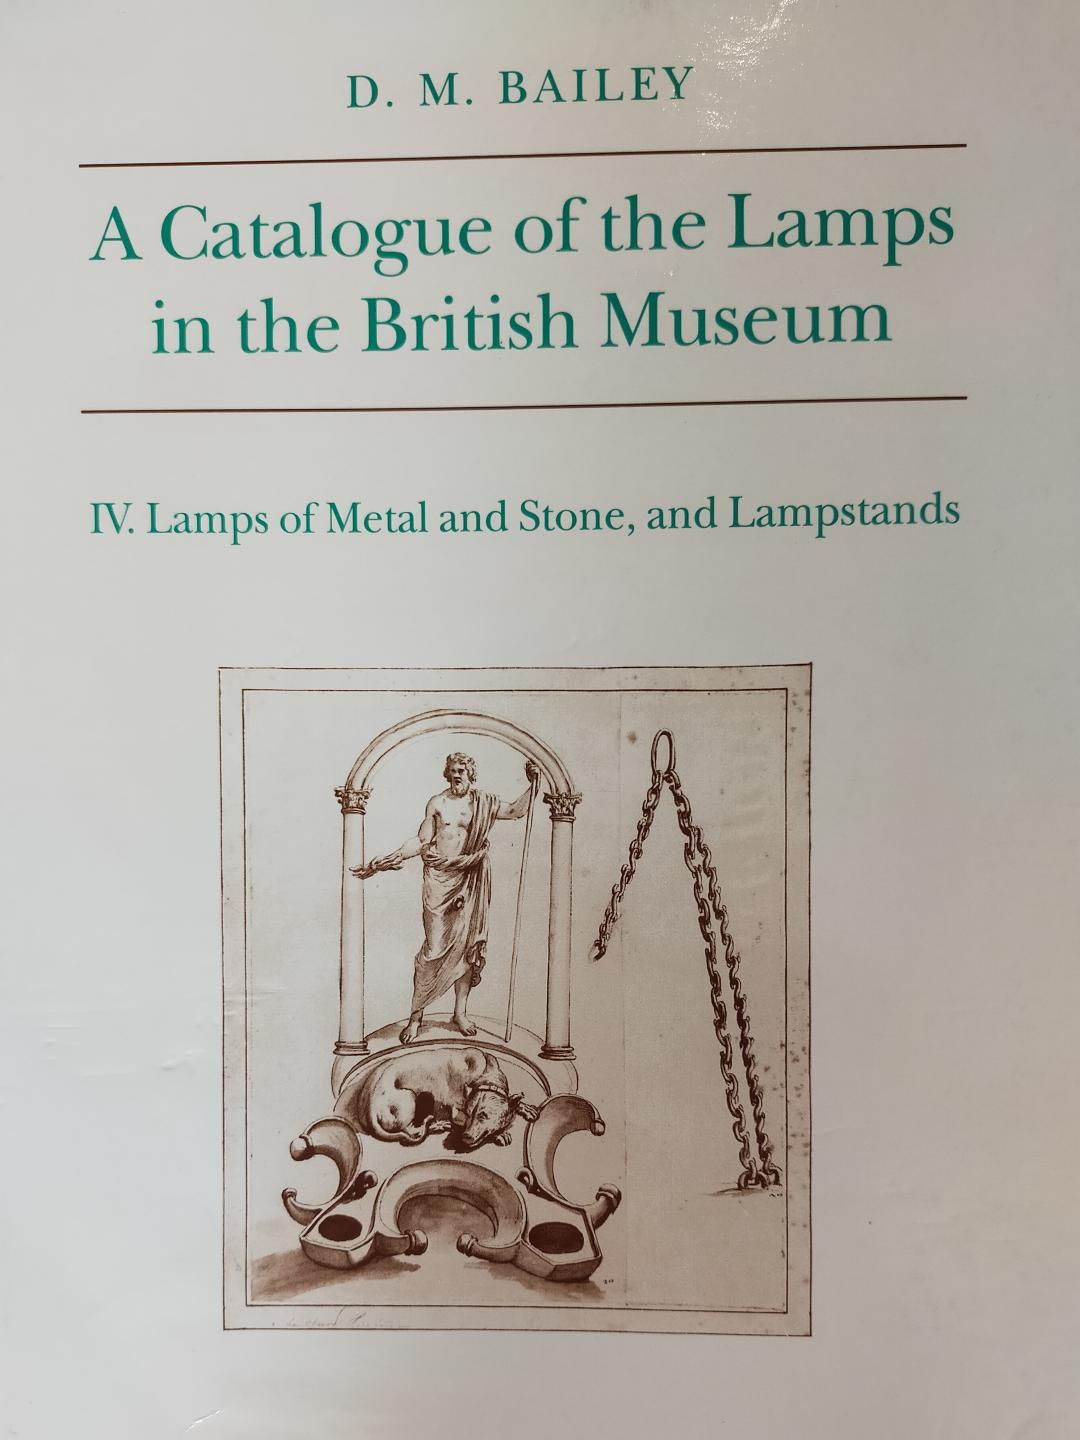 A catalogue of the lamps in the British Museum. Tome IV: Lamps of metal and stone, and lampstands.